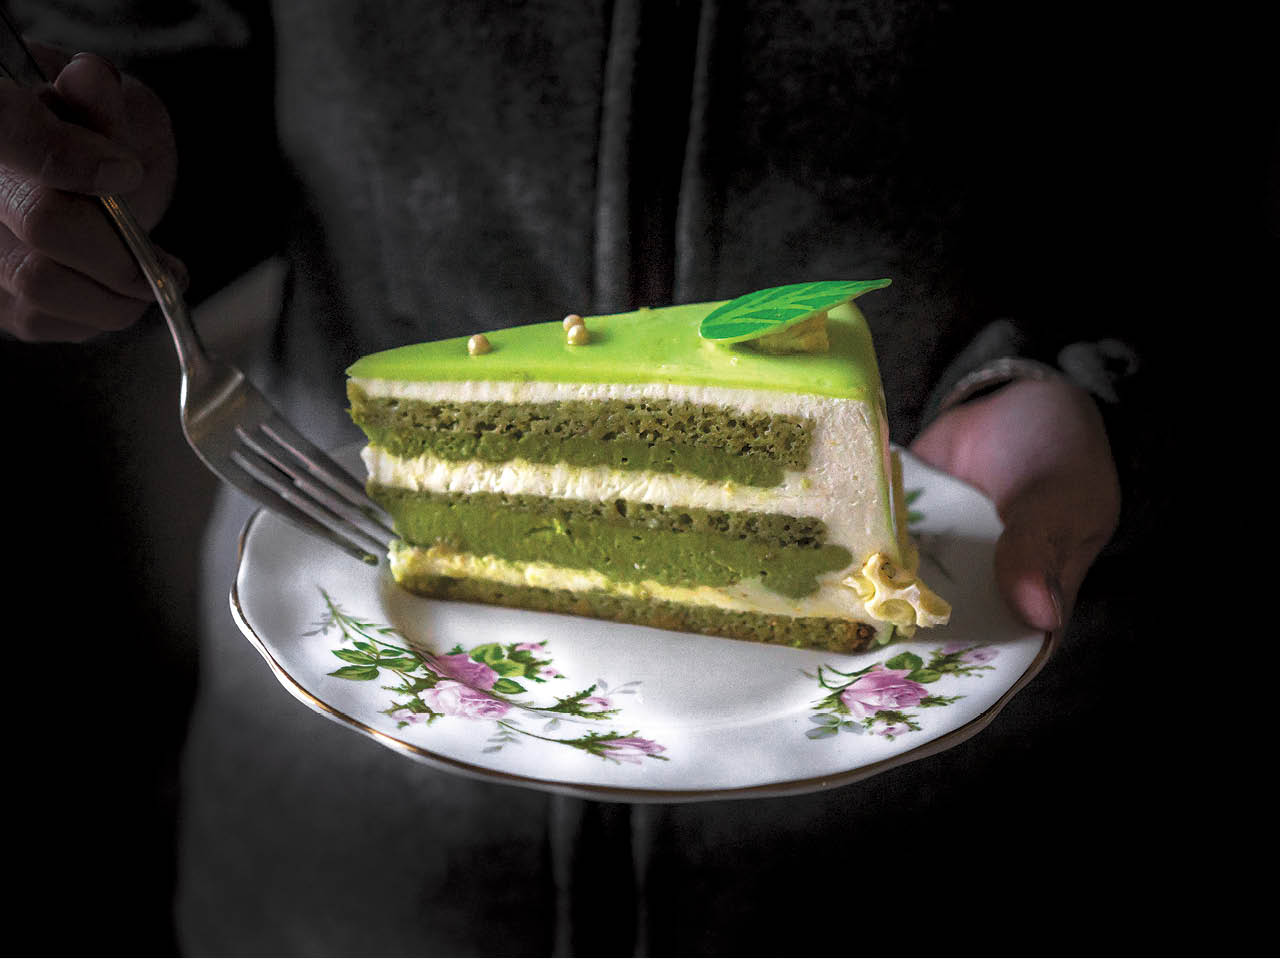 Best foodies on instagran-Jessica Emin's photo pf a slice of green cake